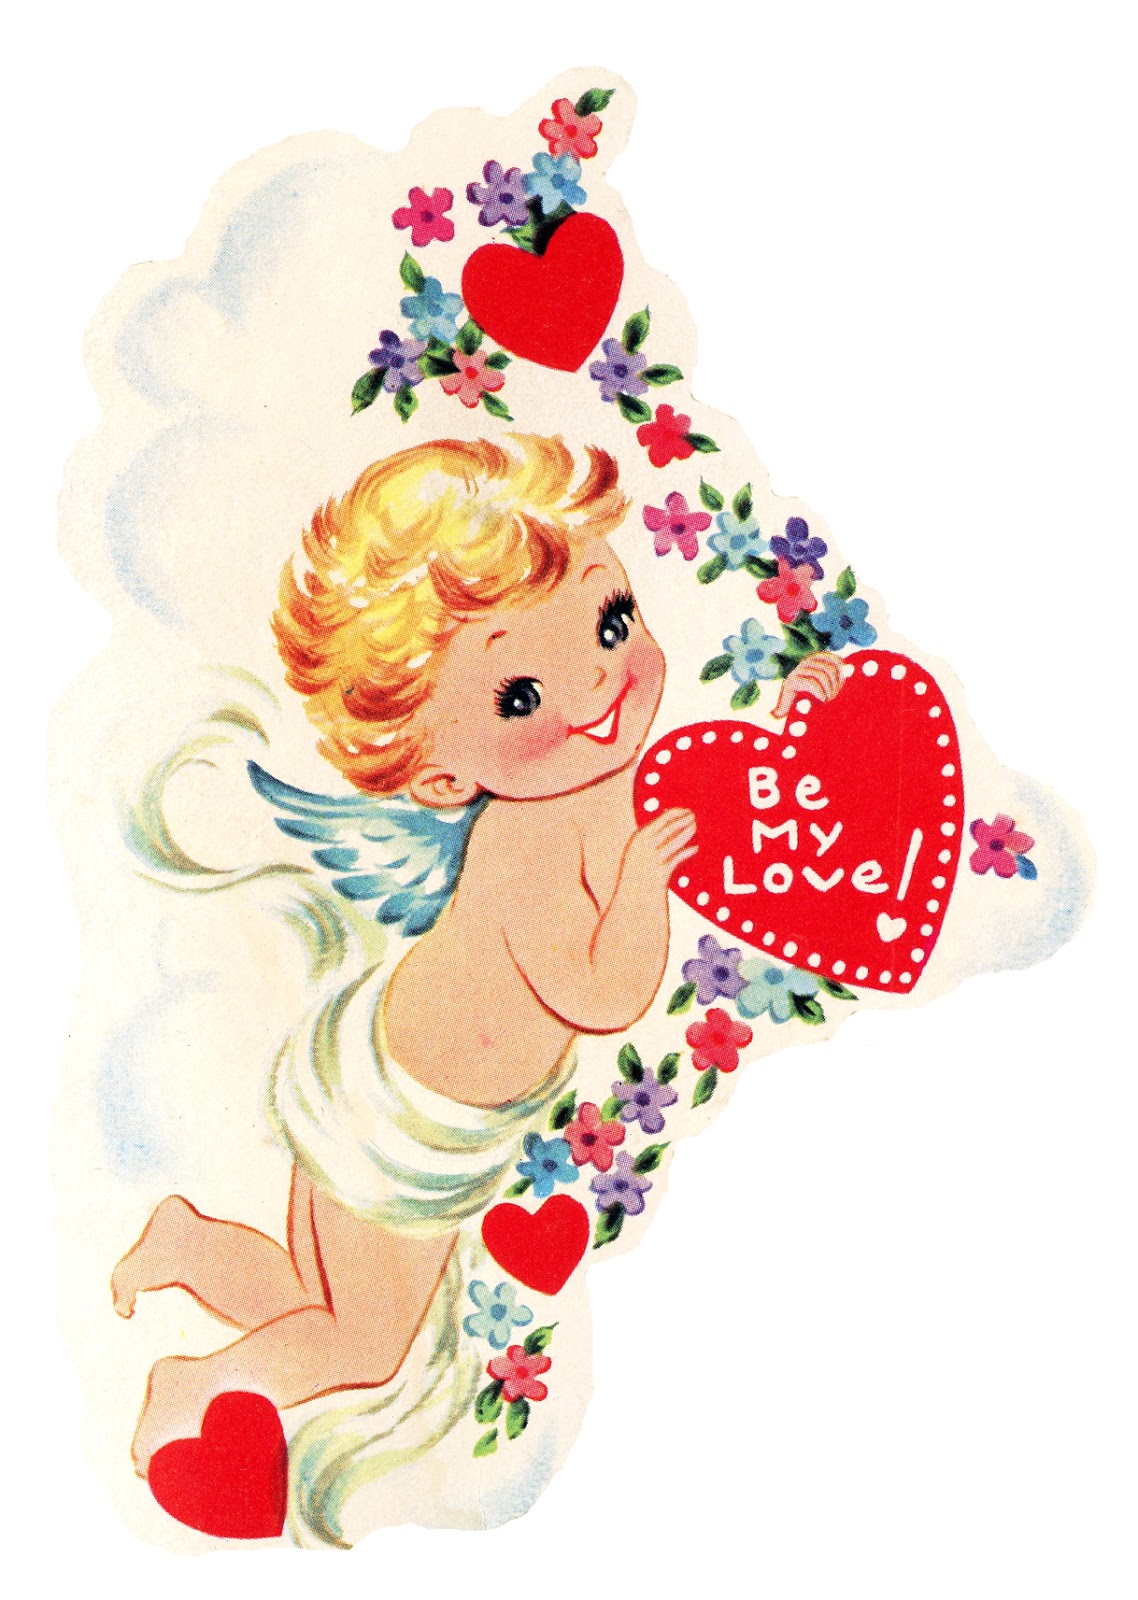 Free Vintage Image - Cupid with Heart - The Graphics Fairy